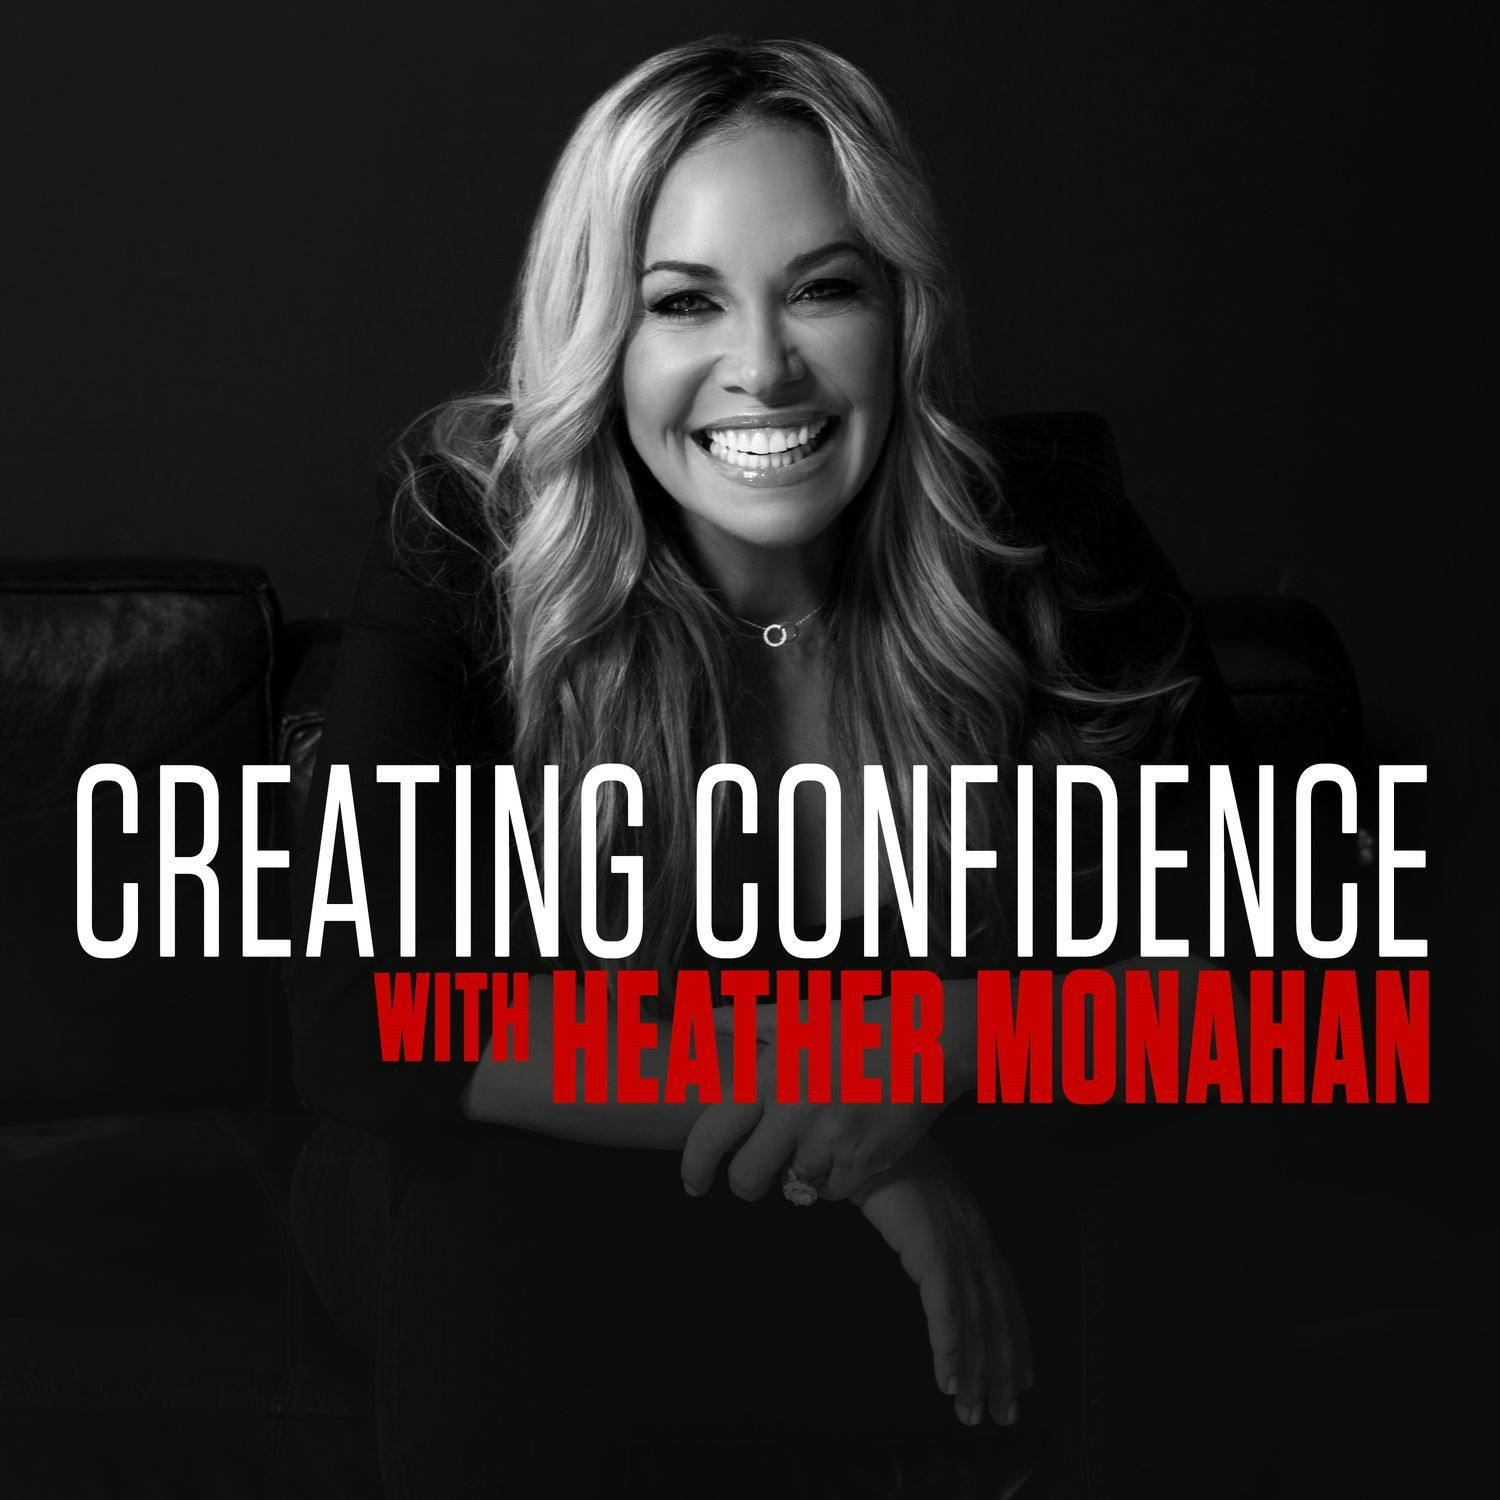 #203: The Key to Attracting More Money Into Your Life With Chris Harder Entrepreneur, Philanthropist & Host Of The Chris Harder Podcast  by Heather Monahan | YAP Media Network